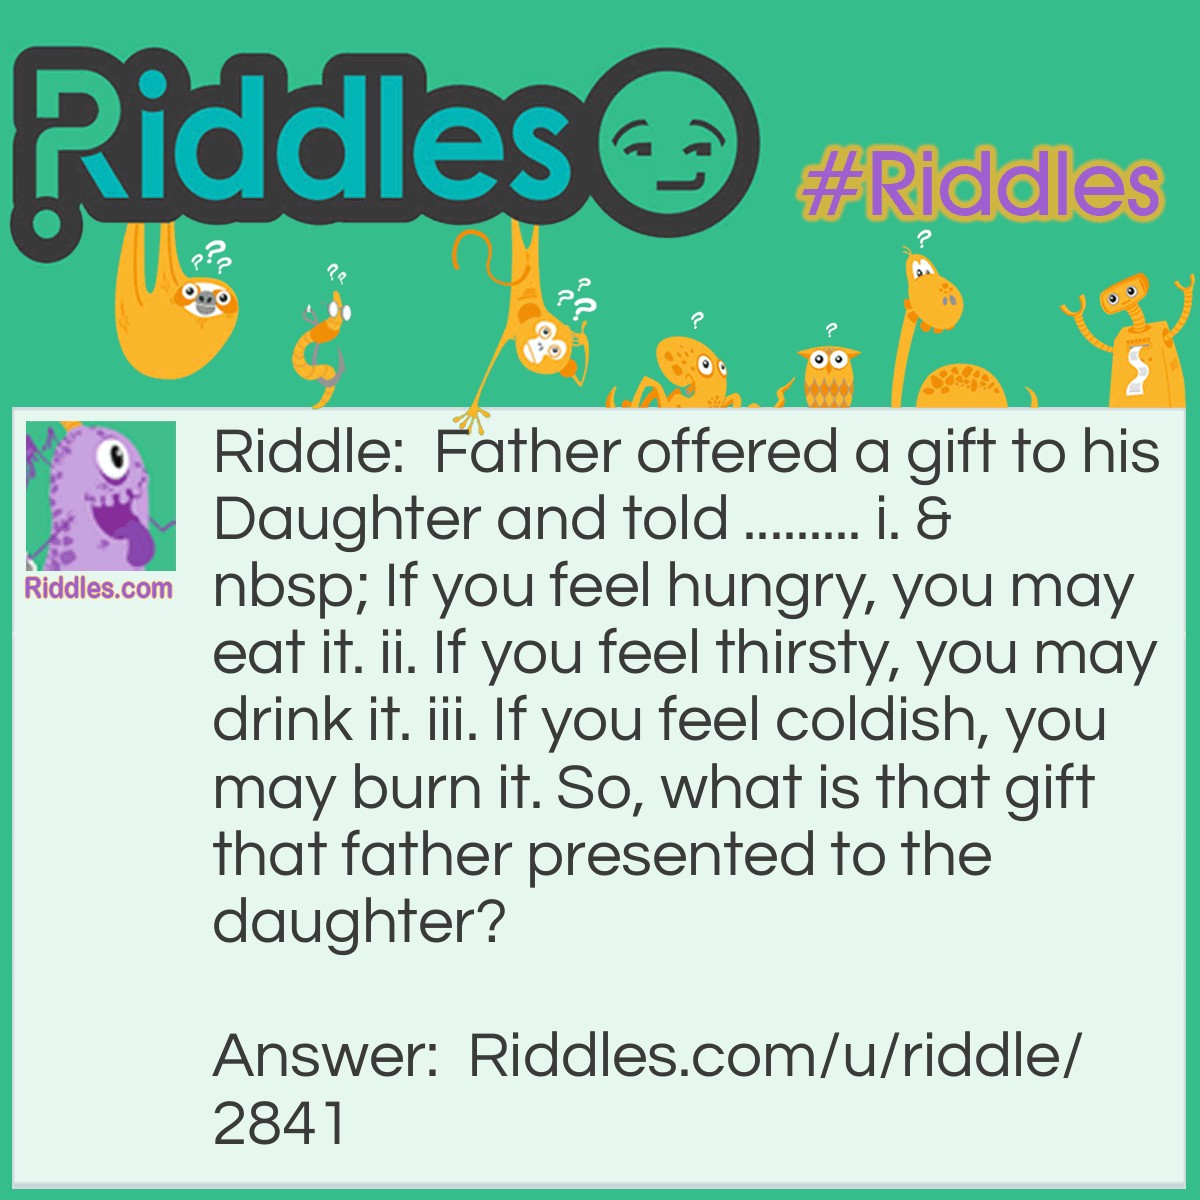 Riddle: Father offered a gift to his Daughter and told ......... i.   If you feel hungry, you may eat it. ii. If you feel thirsty, you may drink it. iii. If you feel coldish, you may burn it. So, what is that gift that father presented to the daughter? Answer: A coconut.